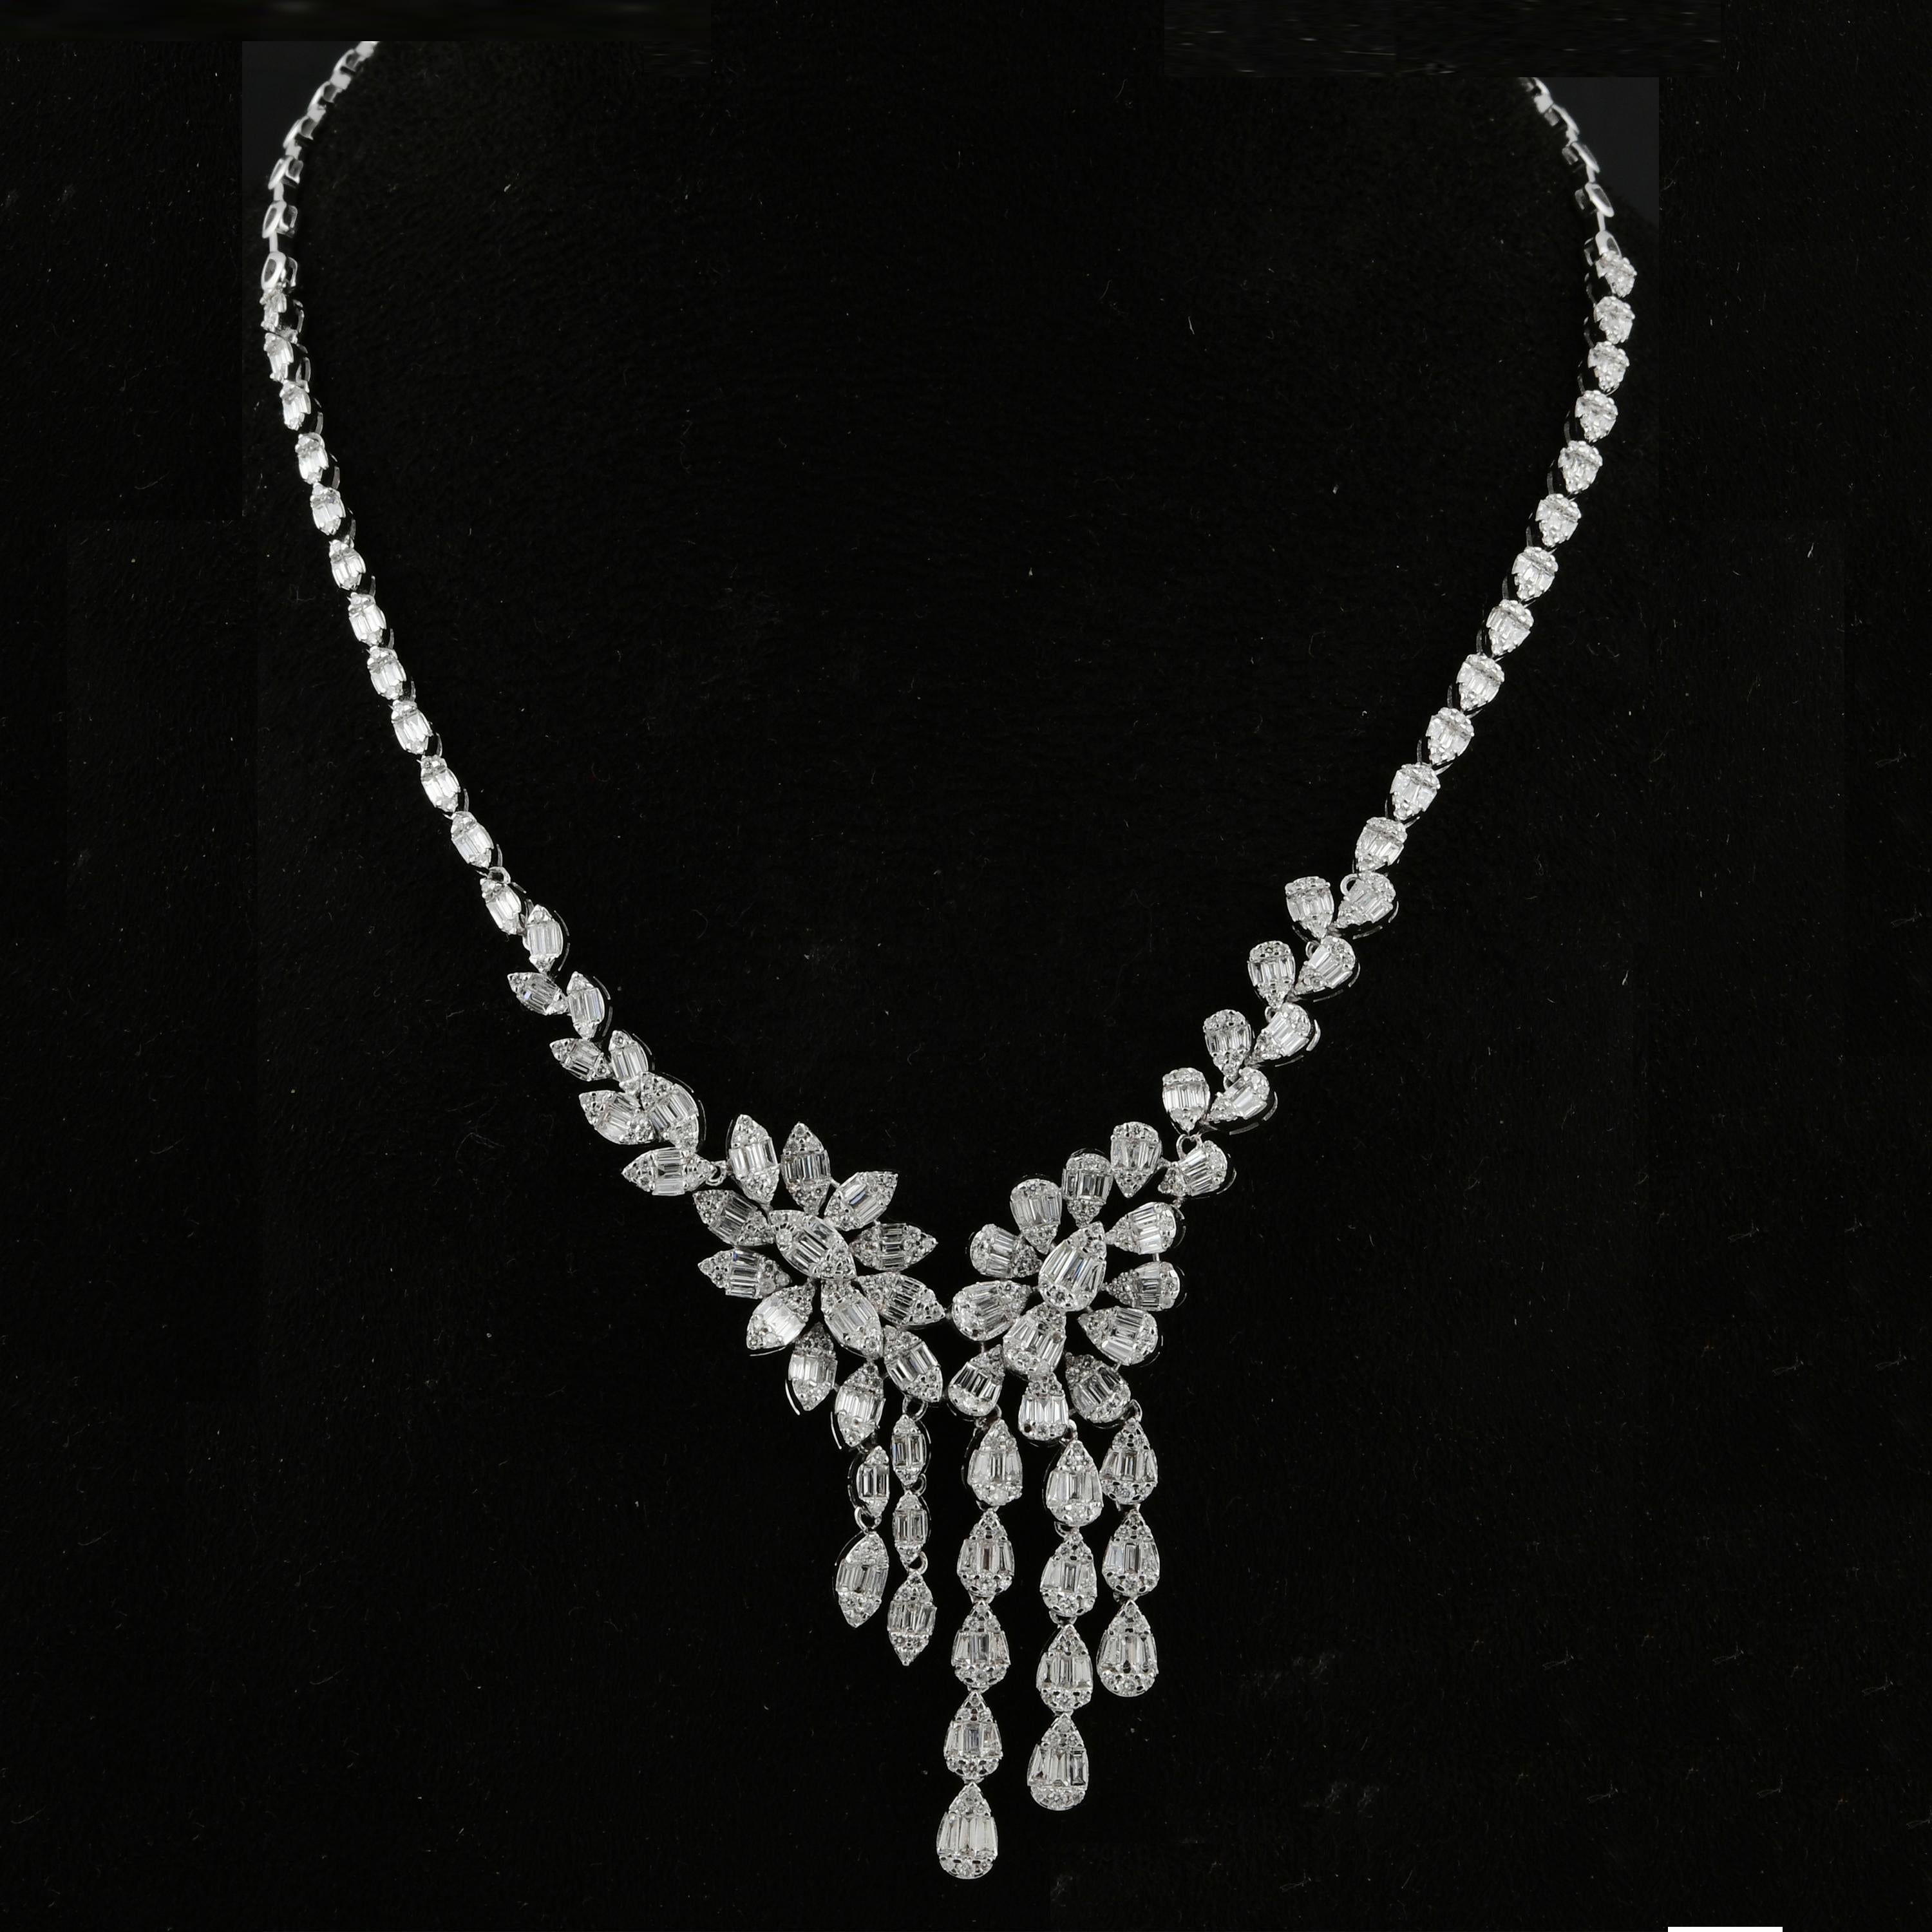 Item Code :- SEN-5793
Gross Wt. :- 35.90 gm
18k White Gold Wt. :- 34.64 gm
Natural Diamond Wt. :- 6.30 Ct.  ( AVERAGE DIAMOND CLARITY SI1-SI2 & COLOR H-I )
Necklace Length :- 16 Inches Long

✦ Sizing
.....................
We can adjust most items to